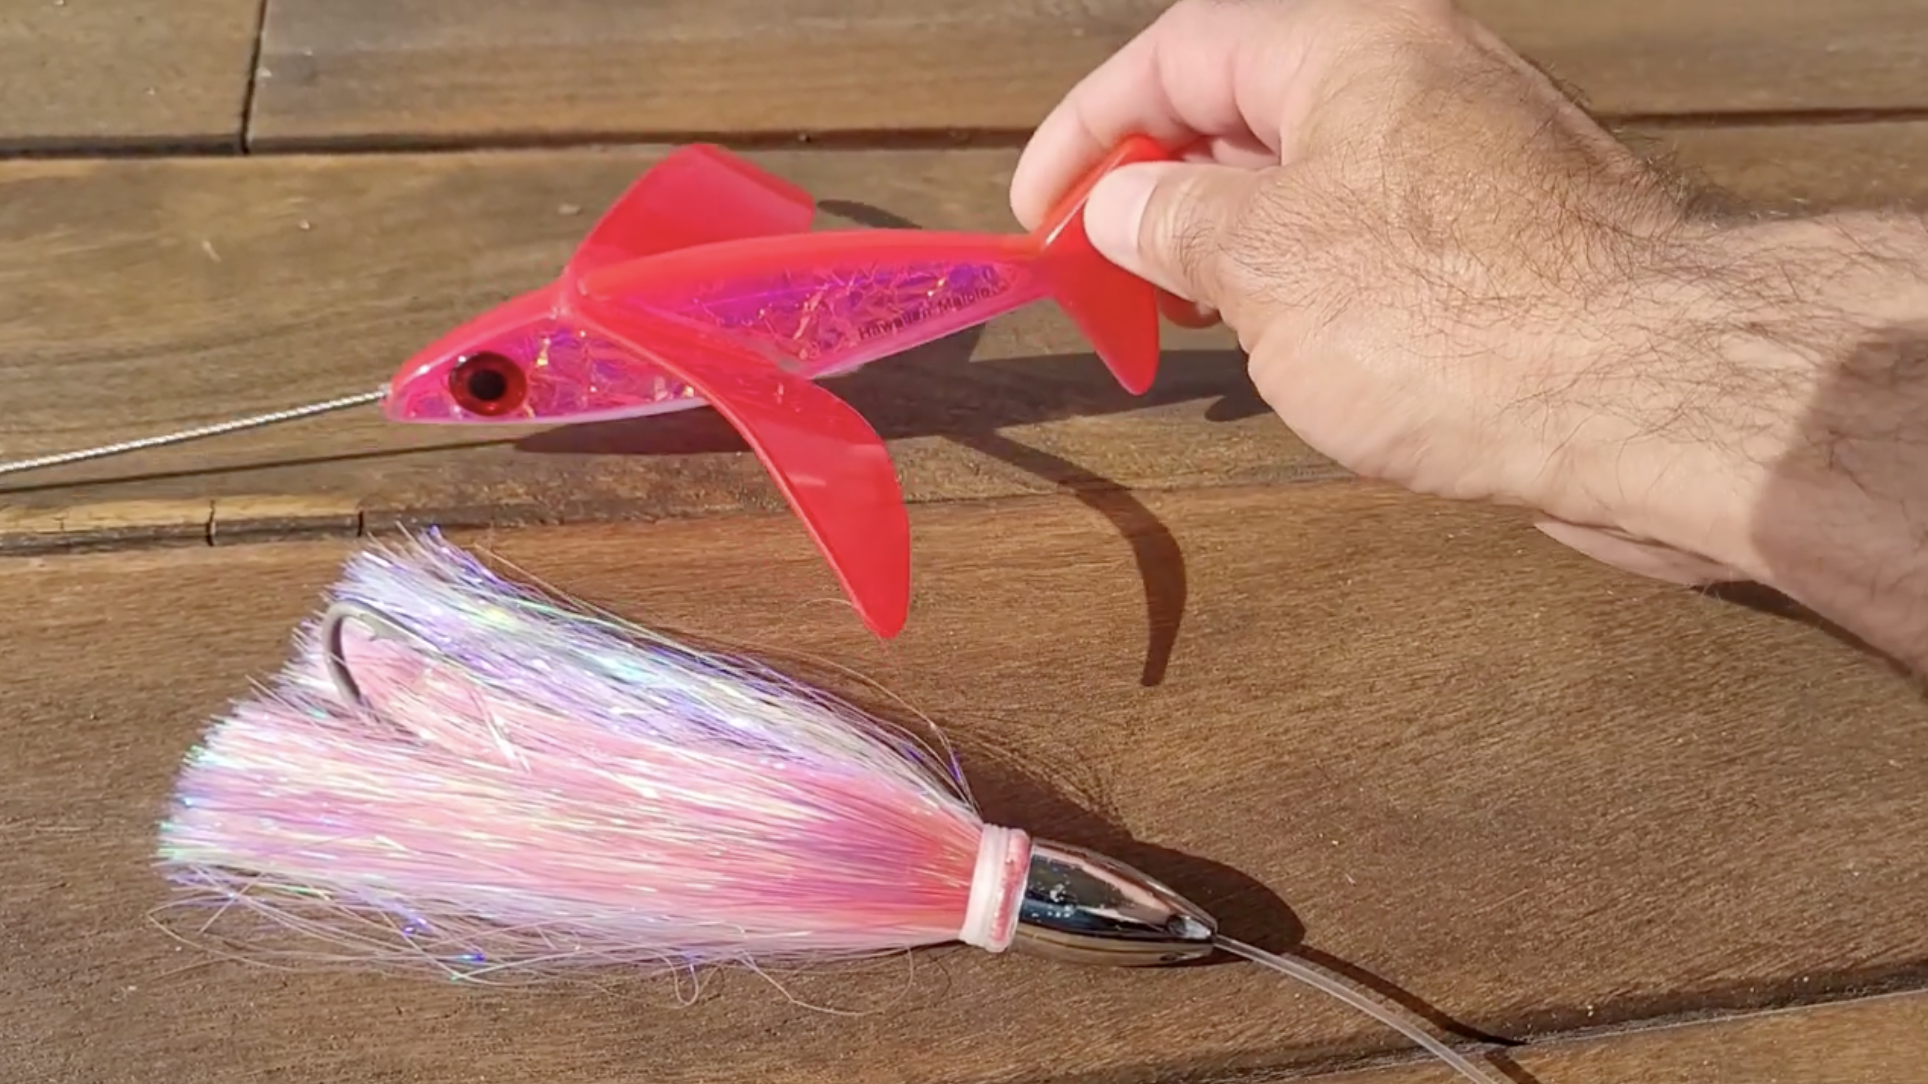 Check out our latest Hawaiian Malolo 'FLASH' birds. Can be paired with lures skirted with Flashabou and come in Blue, Pink and Purple. Will be added to our website soon or order here.